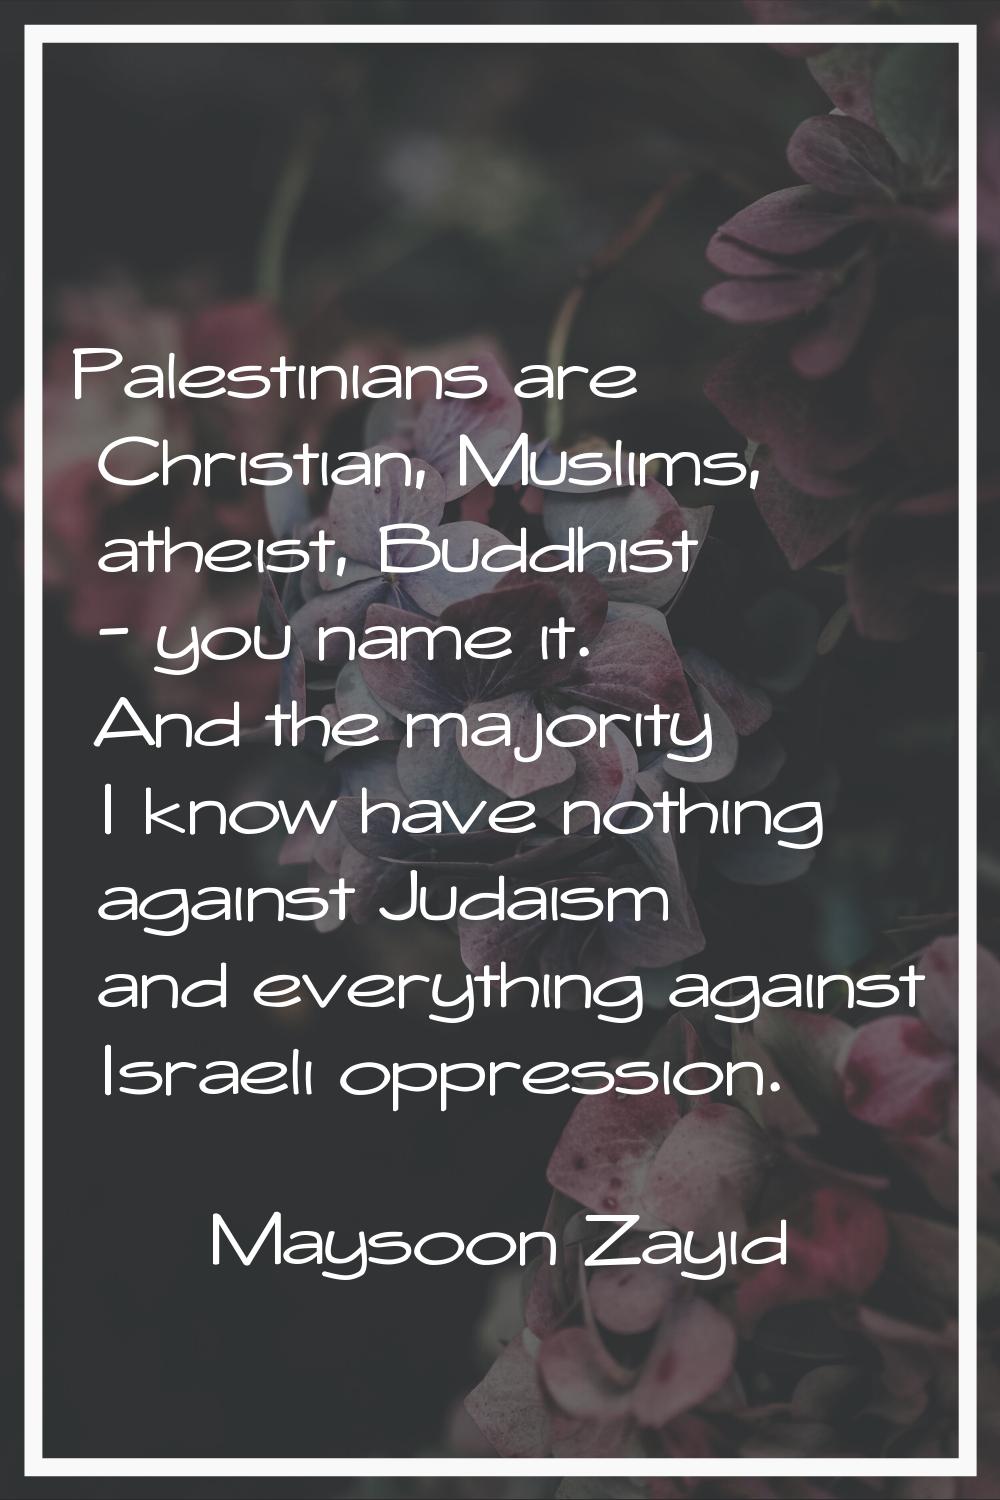 Palestinians are Christian, Muslims, atheist, Buddhist - you name it. And the majority I know have 